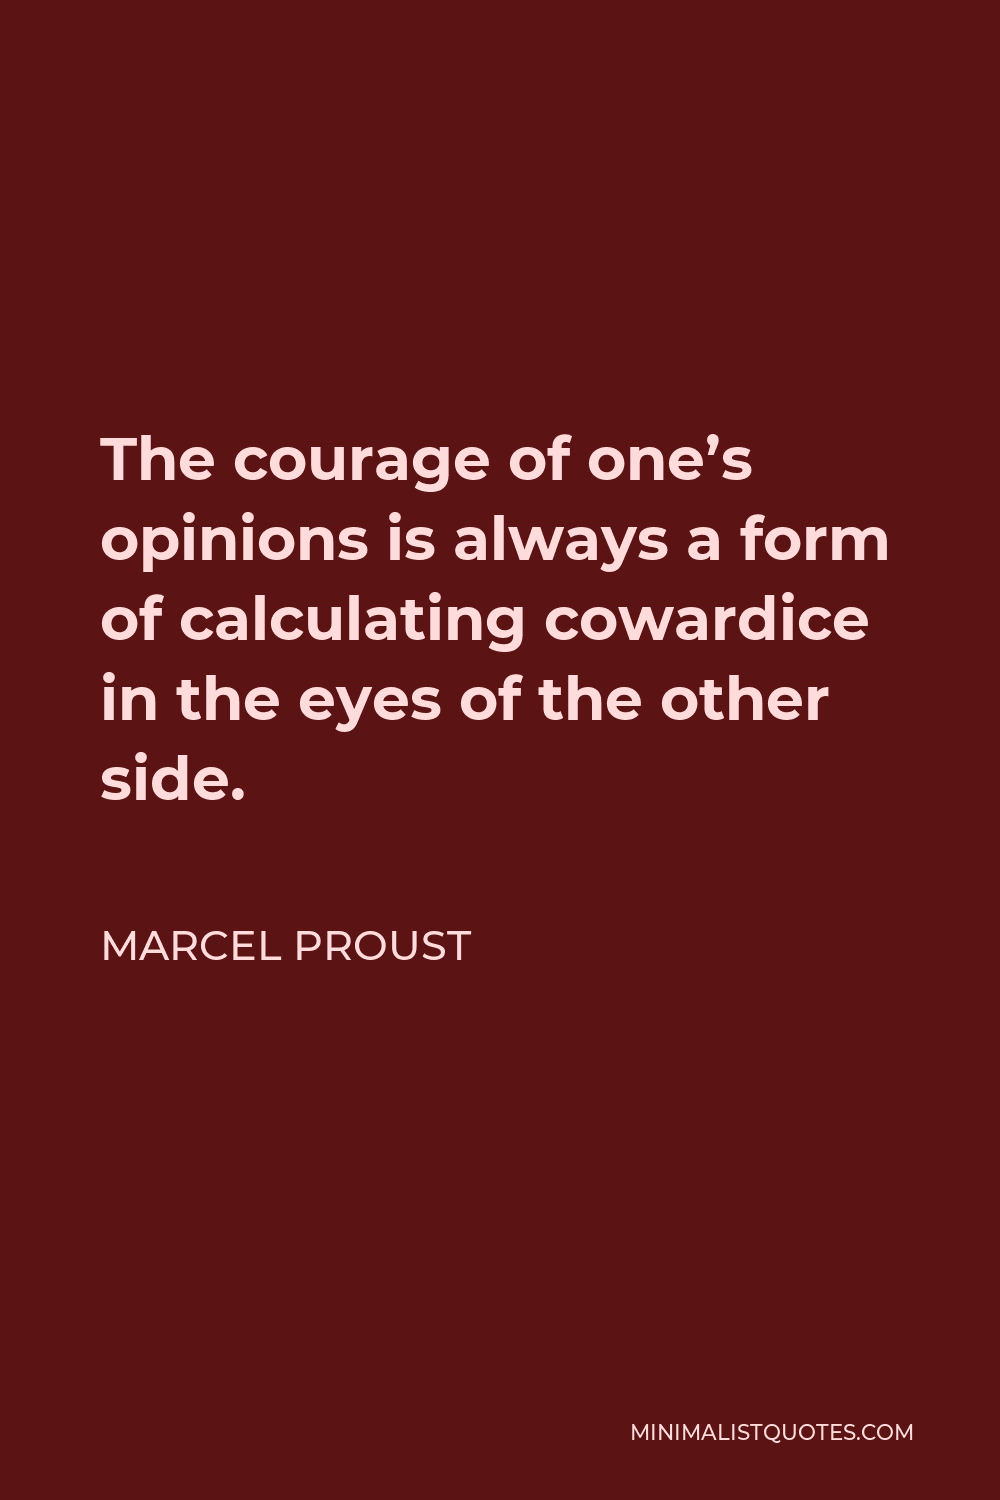 Marcel Proust Quote - The courage of one’s opinions is always a form of calculating cowardice in the eyes of the other side.